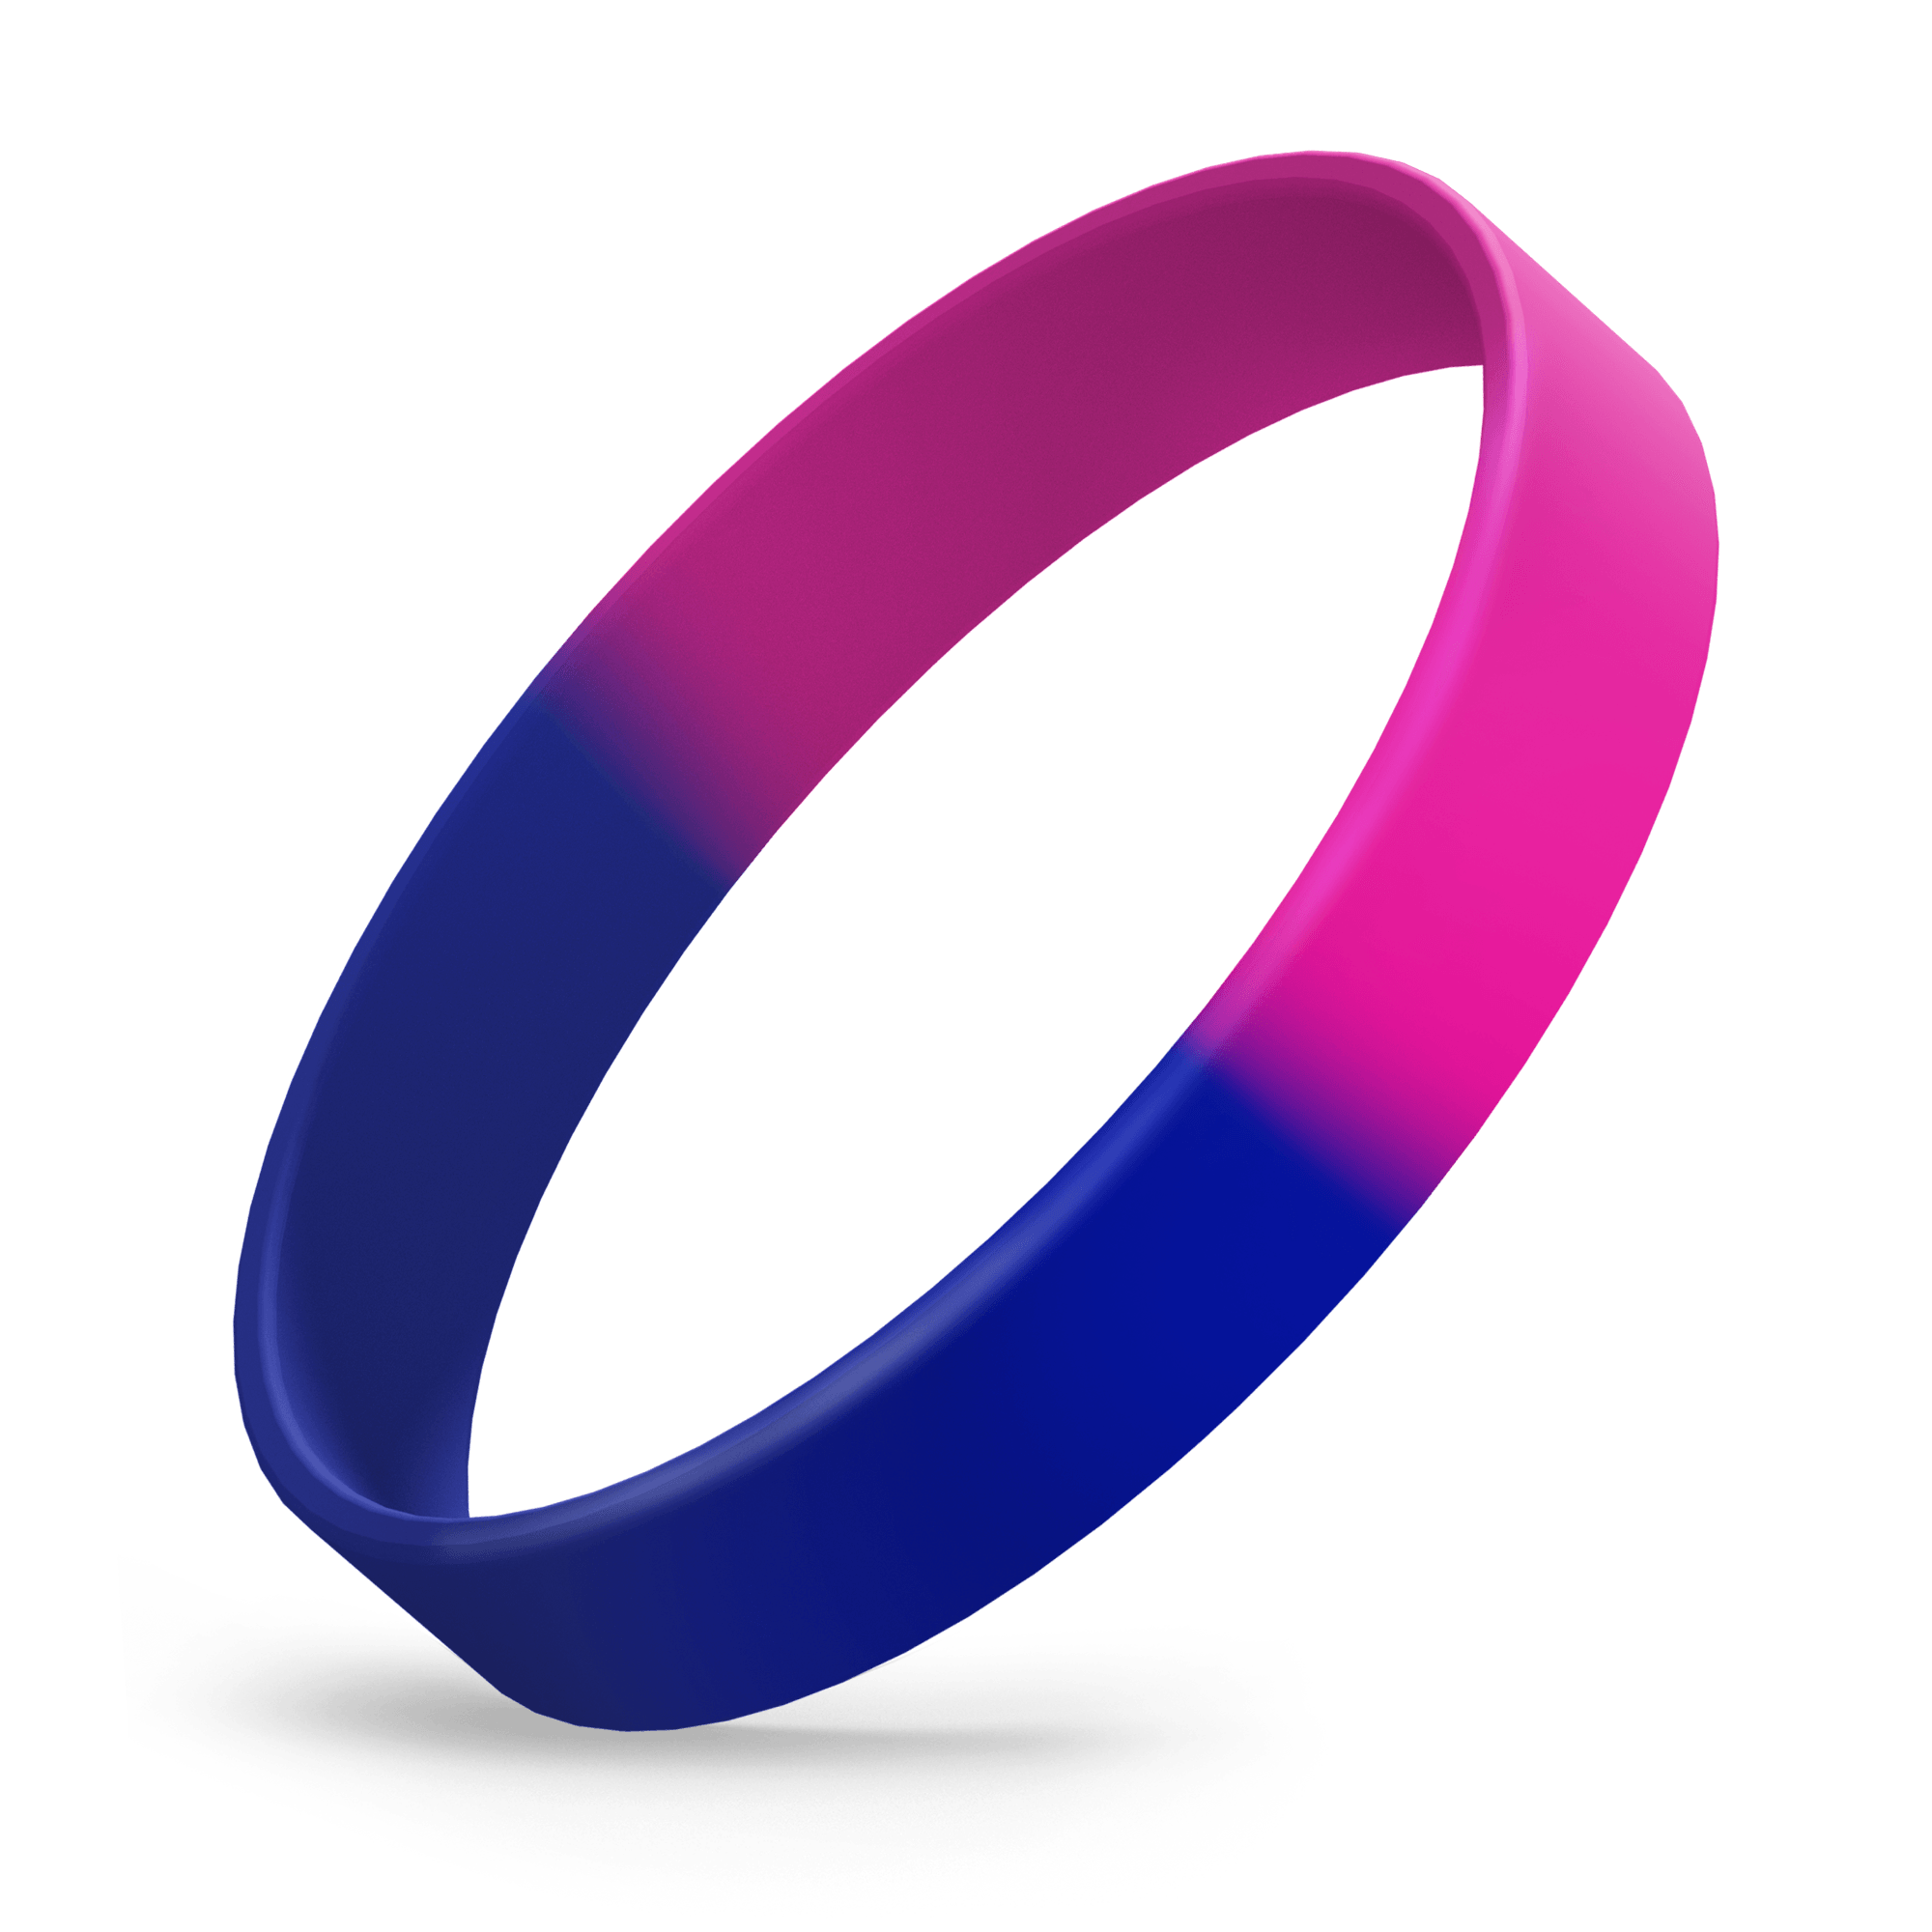 Custom Embossed Printed (Blue / Hot Pink Segmented) Silicone Wristbands - Rubber Bracelets by Wristband Resources